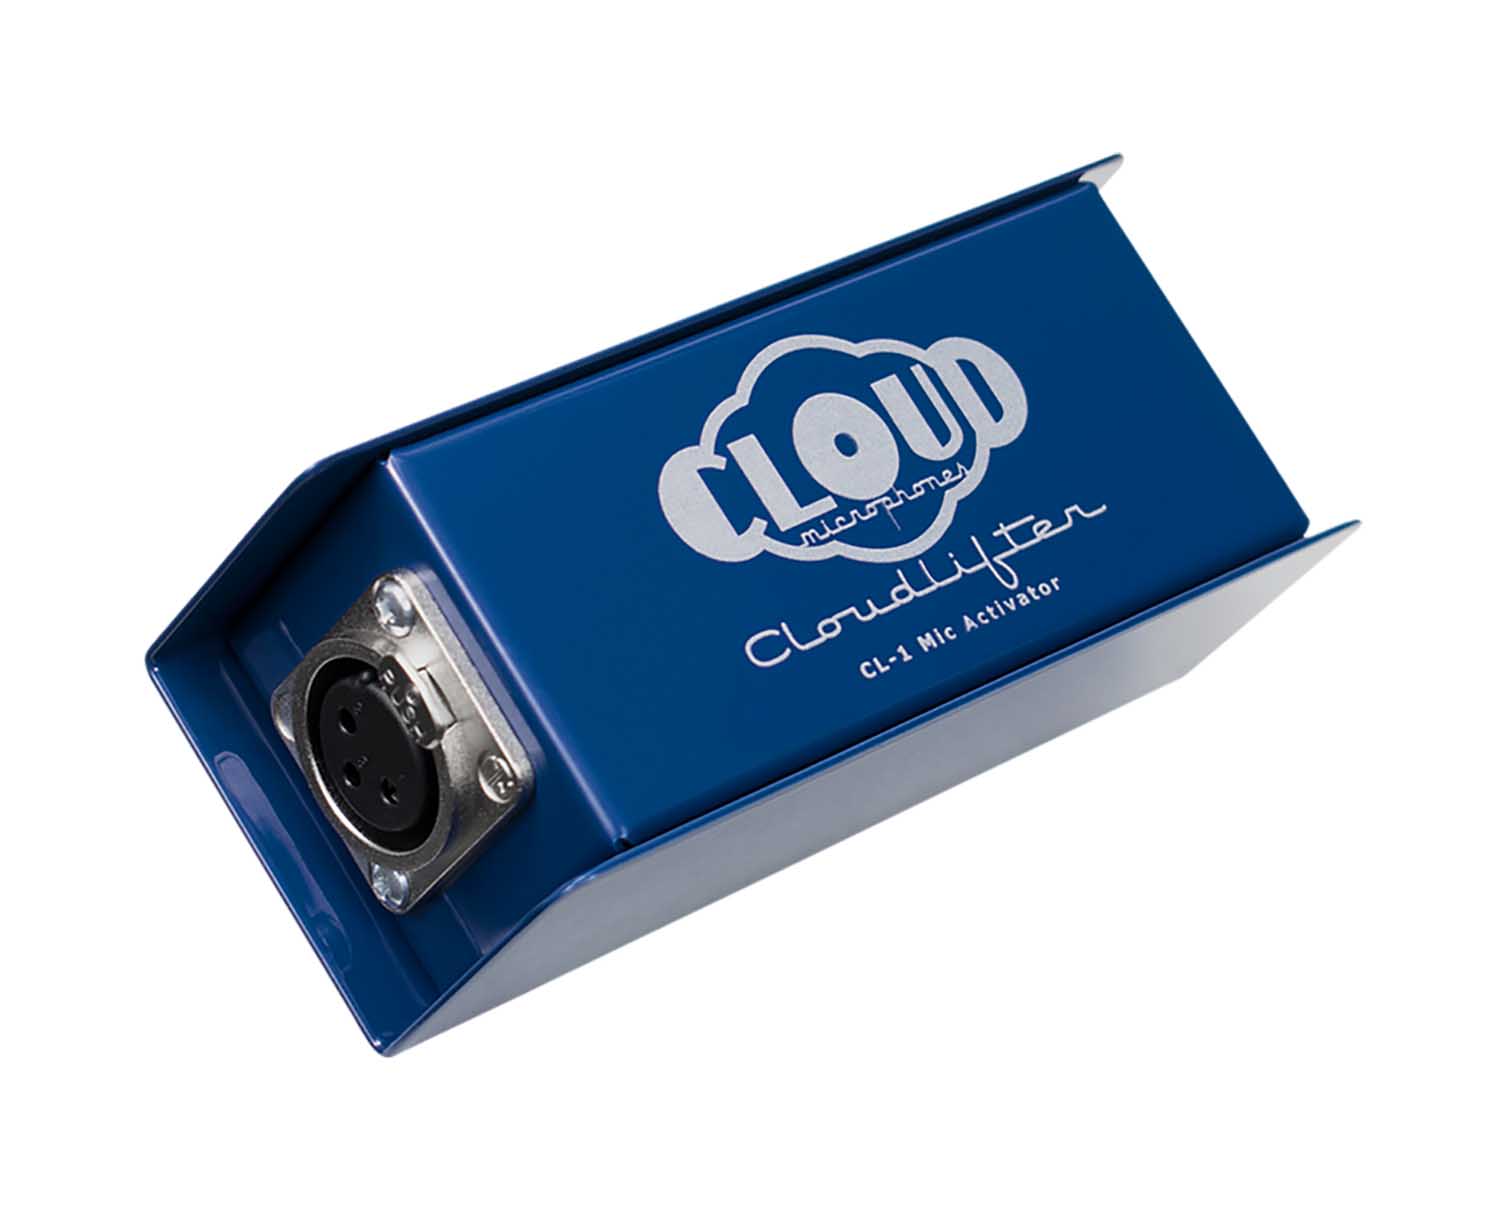 Cloudlifter CL-1, 1-Channel Mic Activator - Mic Booster - Hollywood DJ